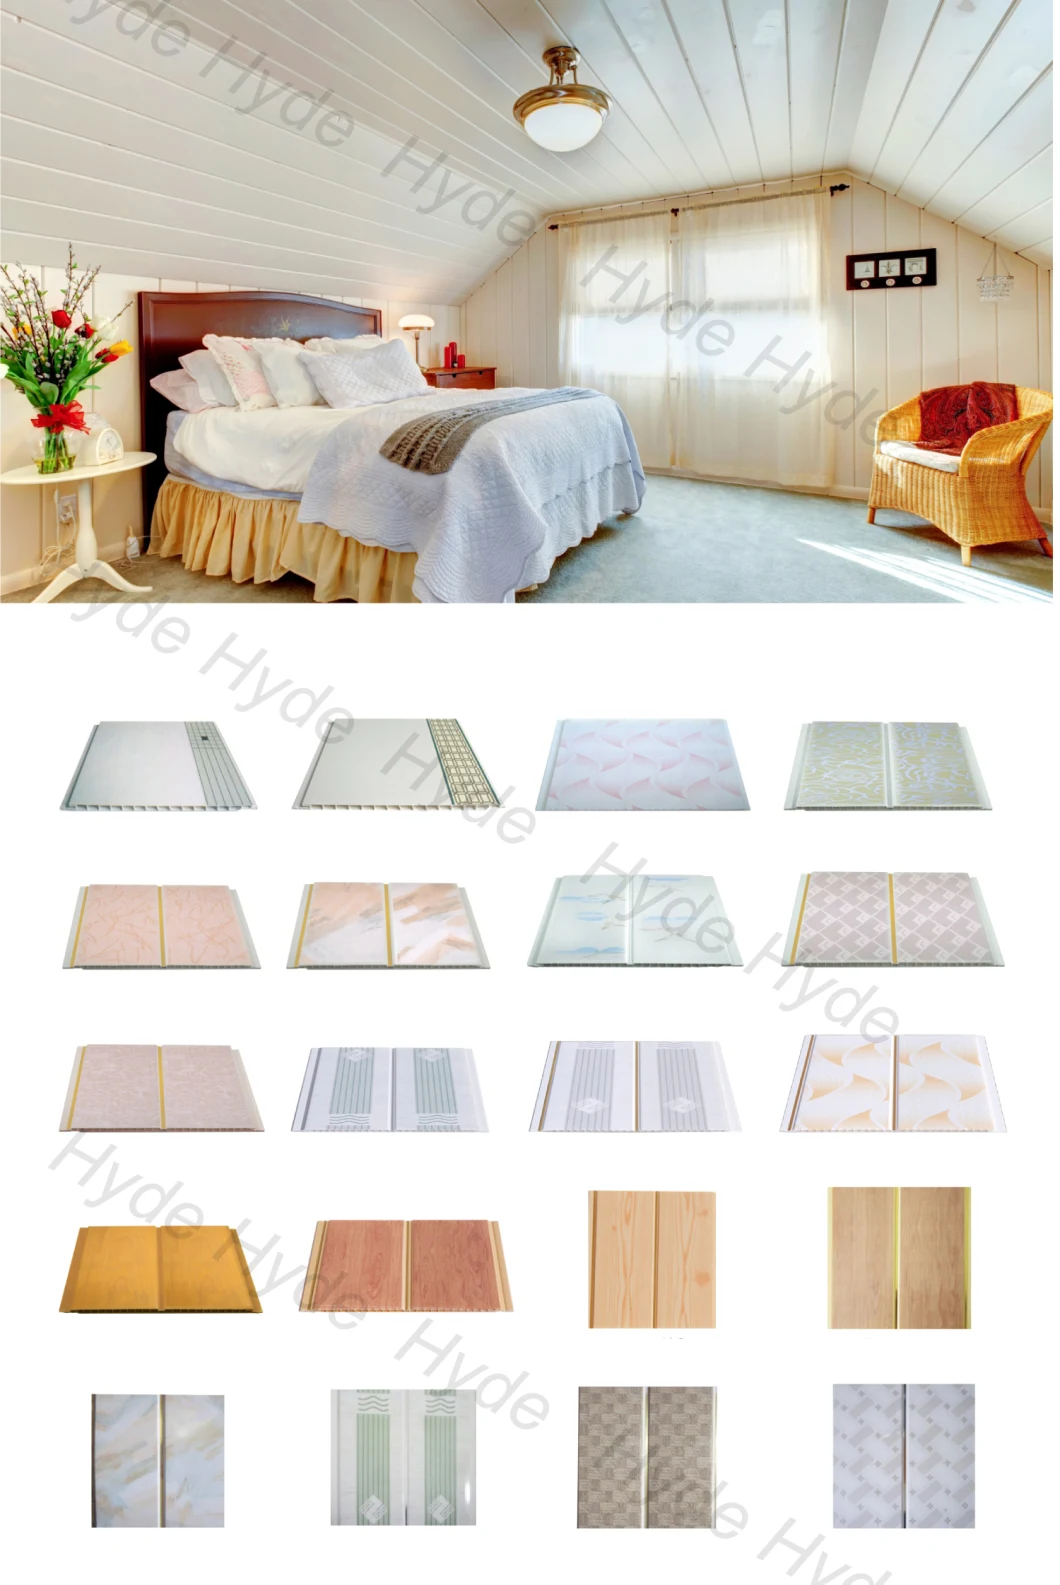 Home Decoration PVC Sheets Plastic Ceiling Designs Wall Cladding Panel